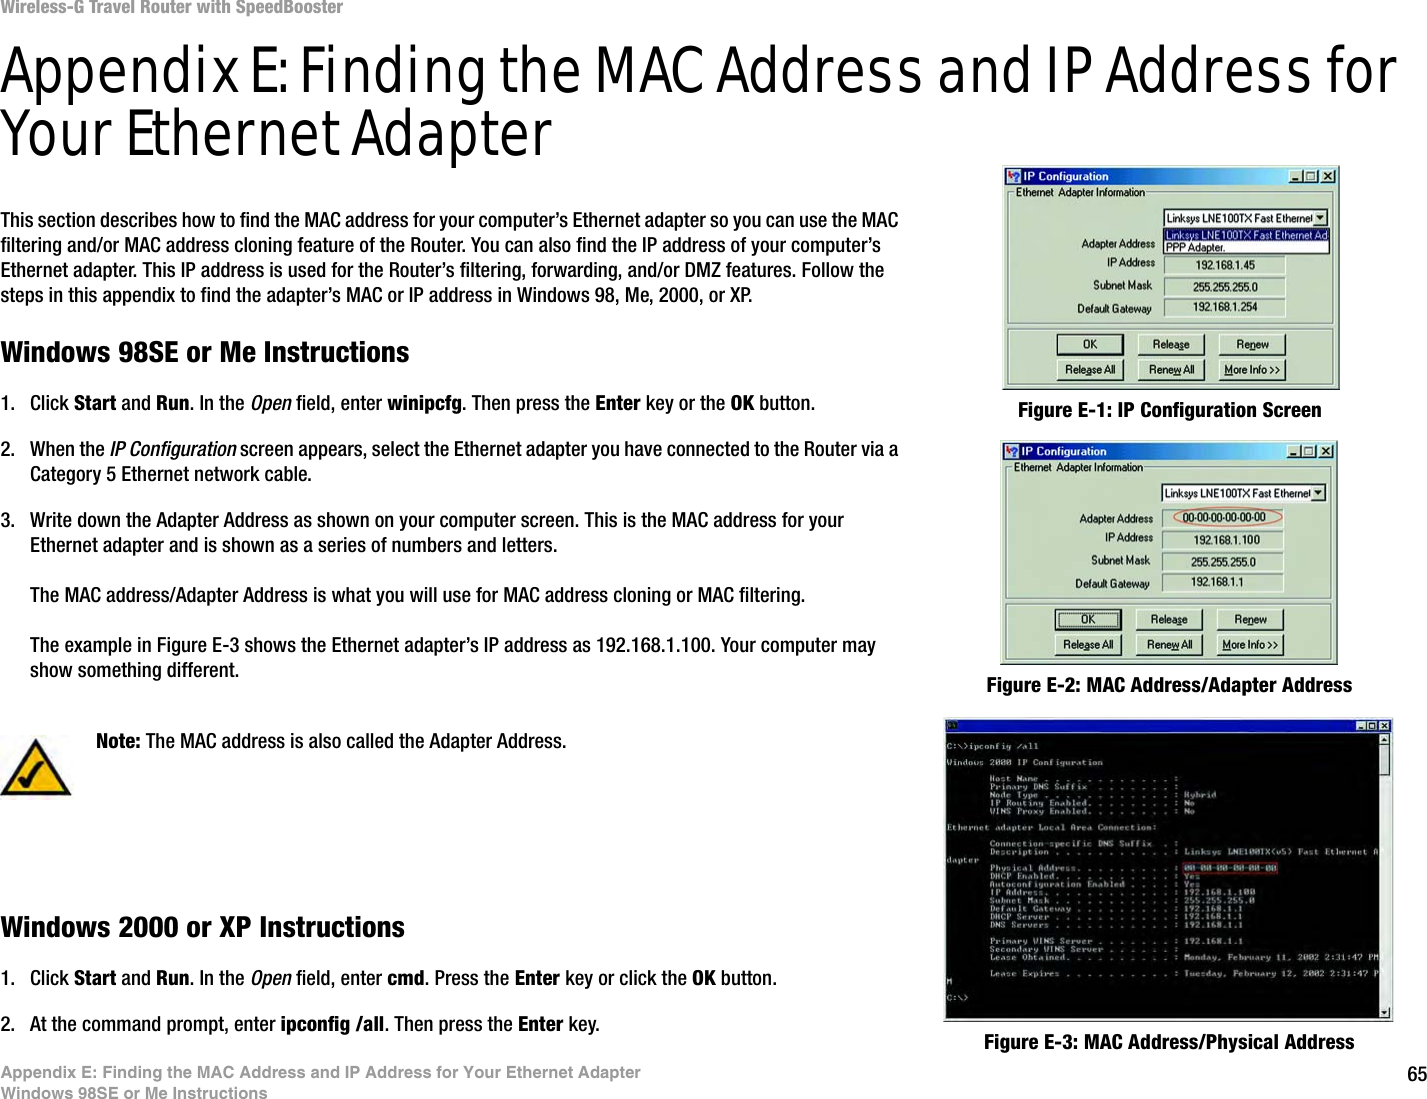 65Appendix E: Finding the MAC Address and IP Address for Your Ethernet AdapterWindows 98SE or Me InstructionsWireless-G Travel Router with SpeedBoosterAppendix E: Finding the MAC Address and IP Address for Your Ethernet AdapterThis section describes how to find the MAC address for your computer’s Ethernet adapter so you can use the MAC filtering and/or MAC address cloning feature of the Router. You can also find the IP address of your computer’s Ethernet adapter. This IP address is used for the Router’s filtering, forwarding, and/or DMZ features. Follow the steps in this appendix to find the adapter’s MAC or IP address in Windows 98, Me, 2000, or XP.Windows 98SE or Me Instructions1. Click Start and Run. In the Open field, enter winipcfg. Then press the Enter key or the OK button. 2. When the IP Configuration screen appears, select the Ethernet adapter you have connected to the Router via a Category 5 Ethernet network cable.3. Write down the Adapter Address as shown on your computer screen. This is the MAC address for your Ethernet adapter and is shown as a series of numbers and letters.The MAC address/Adapter Address is what you will use for MAC address cloning or MAC filtering.The example in Figure E-3 shows the Ethernet adapter’s IP address as 192.168.1.100. Your computer may show something different.Windows 2000 or XP Instructions1. Click Start and Run. In the Open field, enter cmd. Press the Enter key or click the OK button.2. At the command prompt, enter ipconfig /all. Then press the Enter key.Figure E-2: MAC Address/Adapter AddressFigure E-1: IP Configuration ScreenNote: The MAC address is also called the Adapter Address.Figure E-3: MAC Address/Physical Address